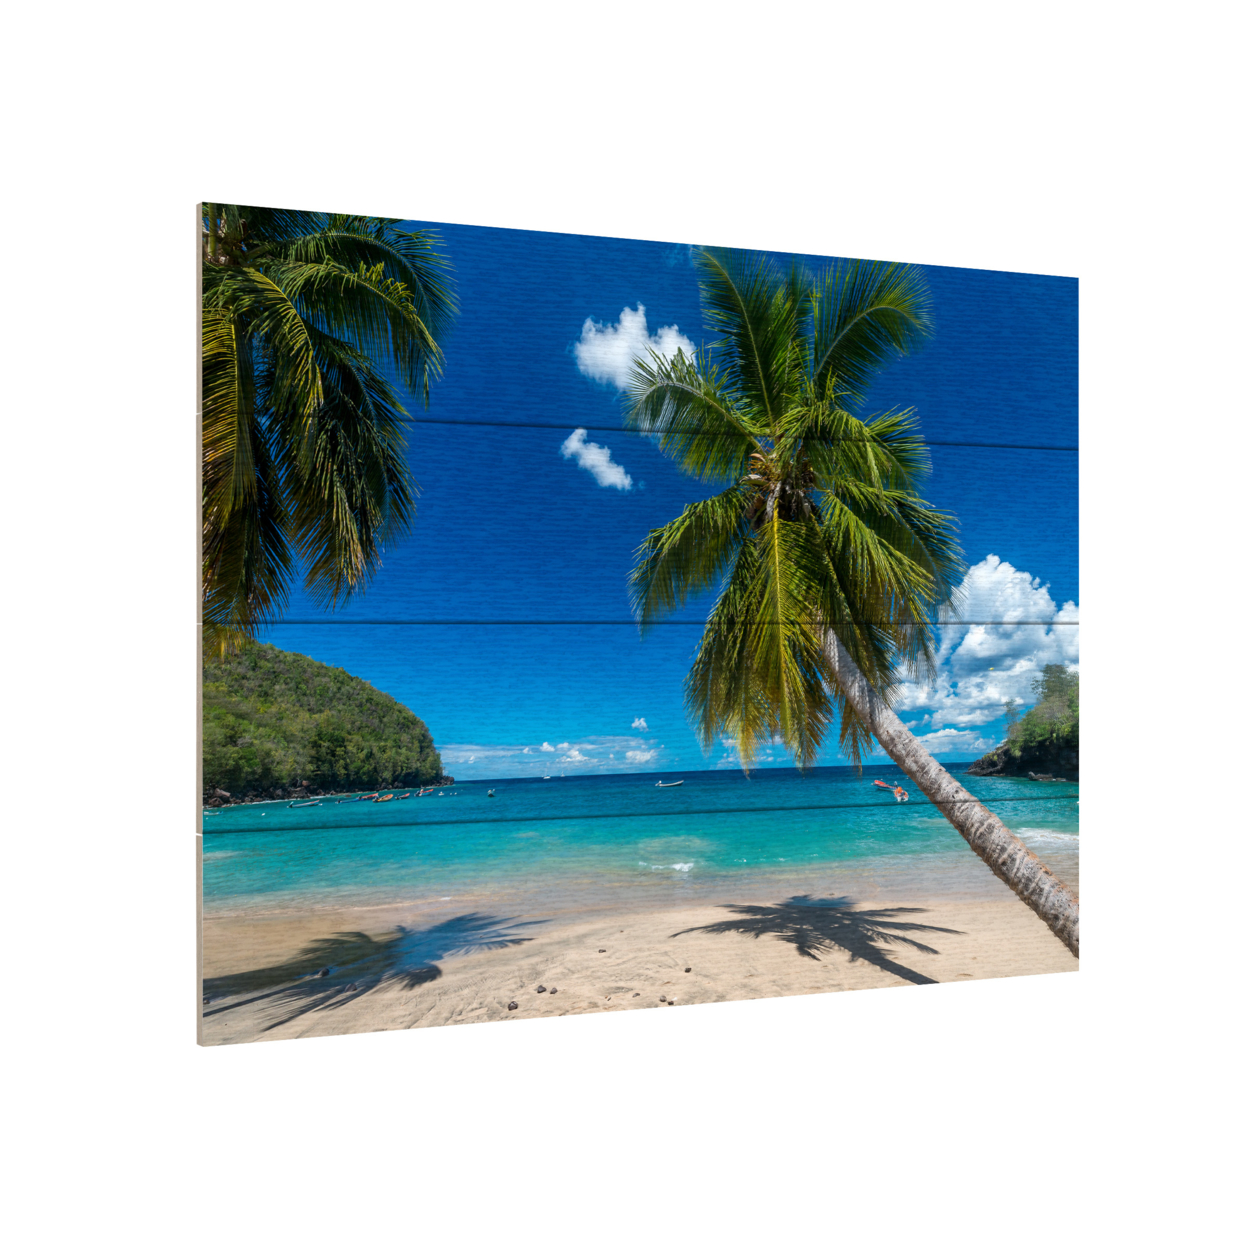 Wall Art 12 X 16 Inches Titled Martinique Ready To Hang Printed On Wooden Planks